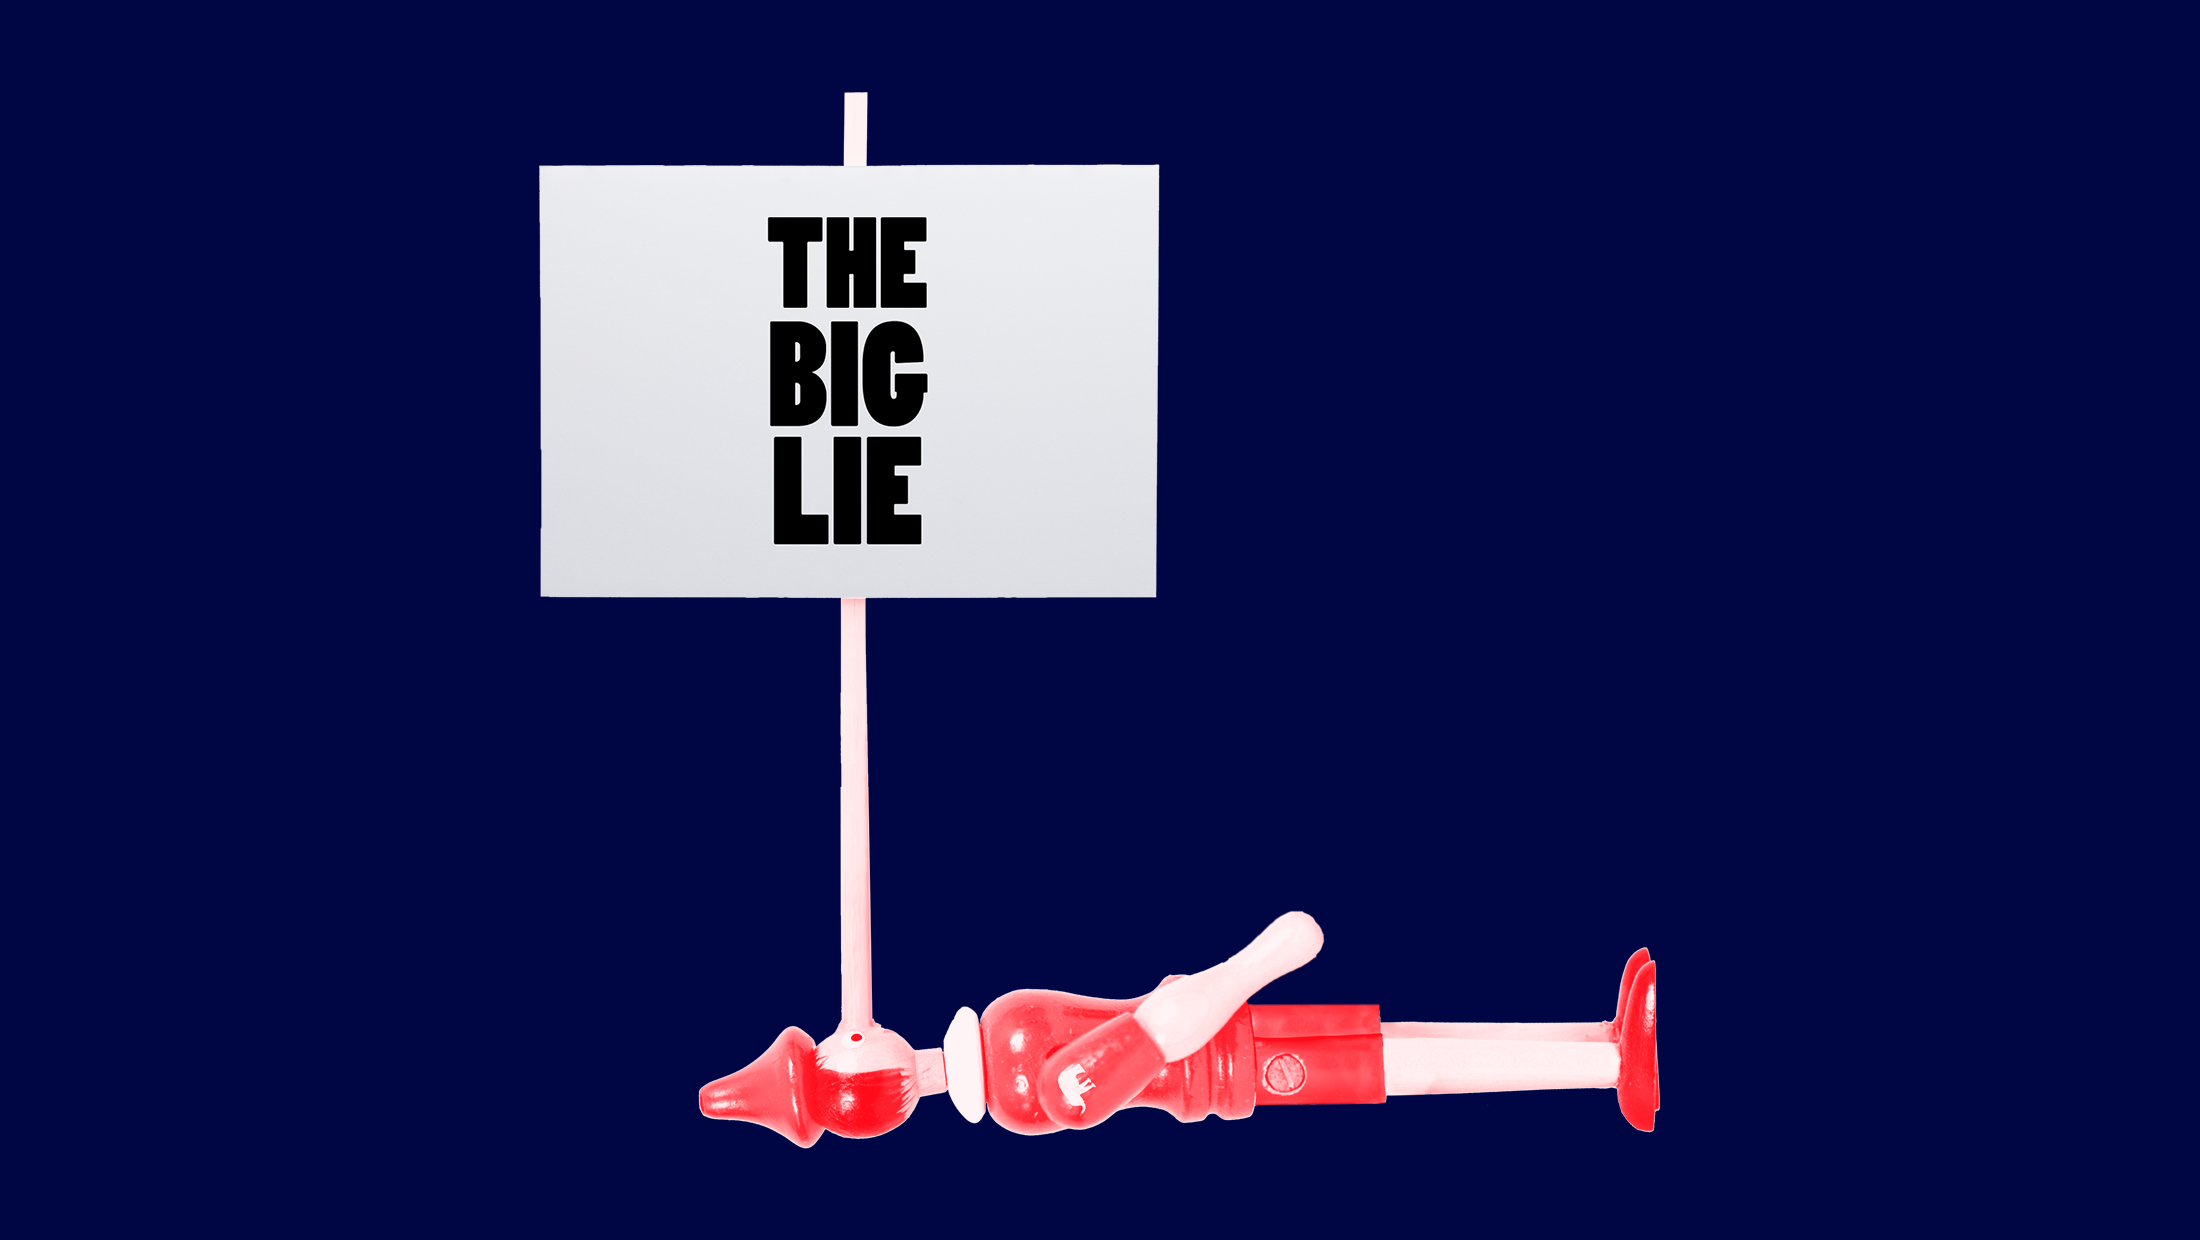 A red-tinted wooden Pinocchio using his long nose to prop up a sign that says "THE BIG LIE"